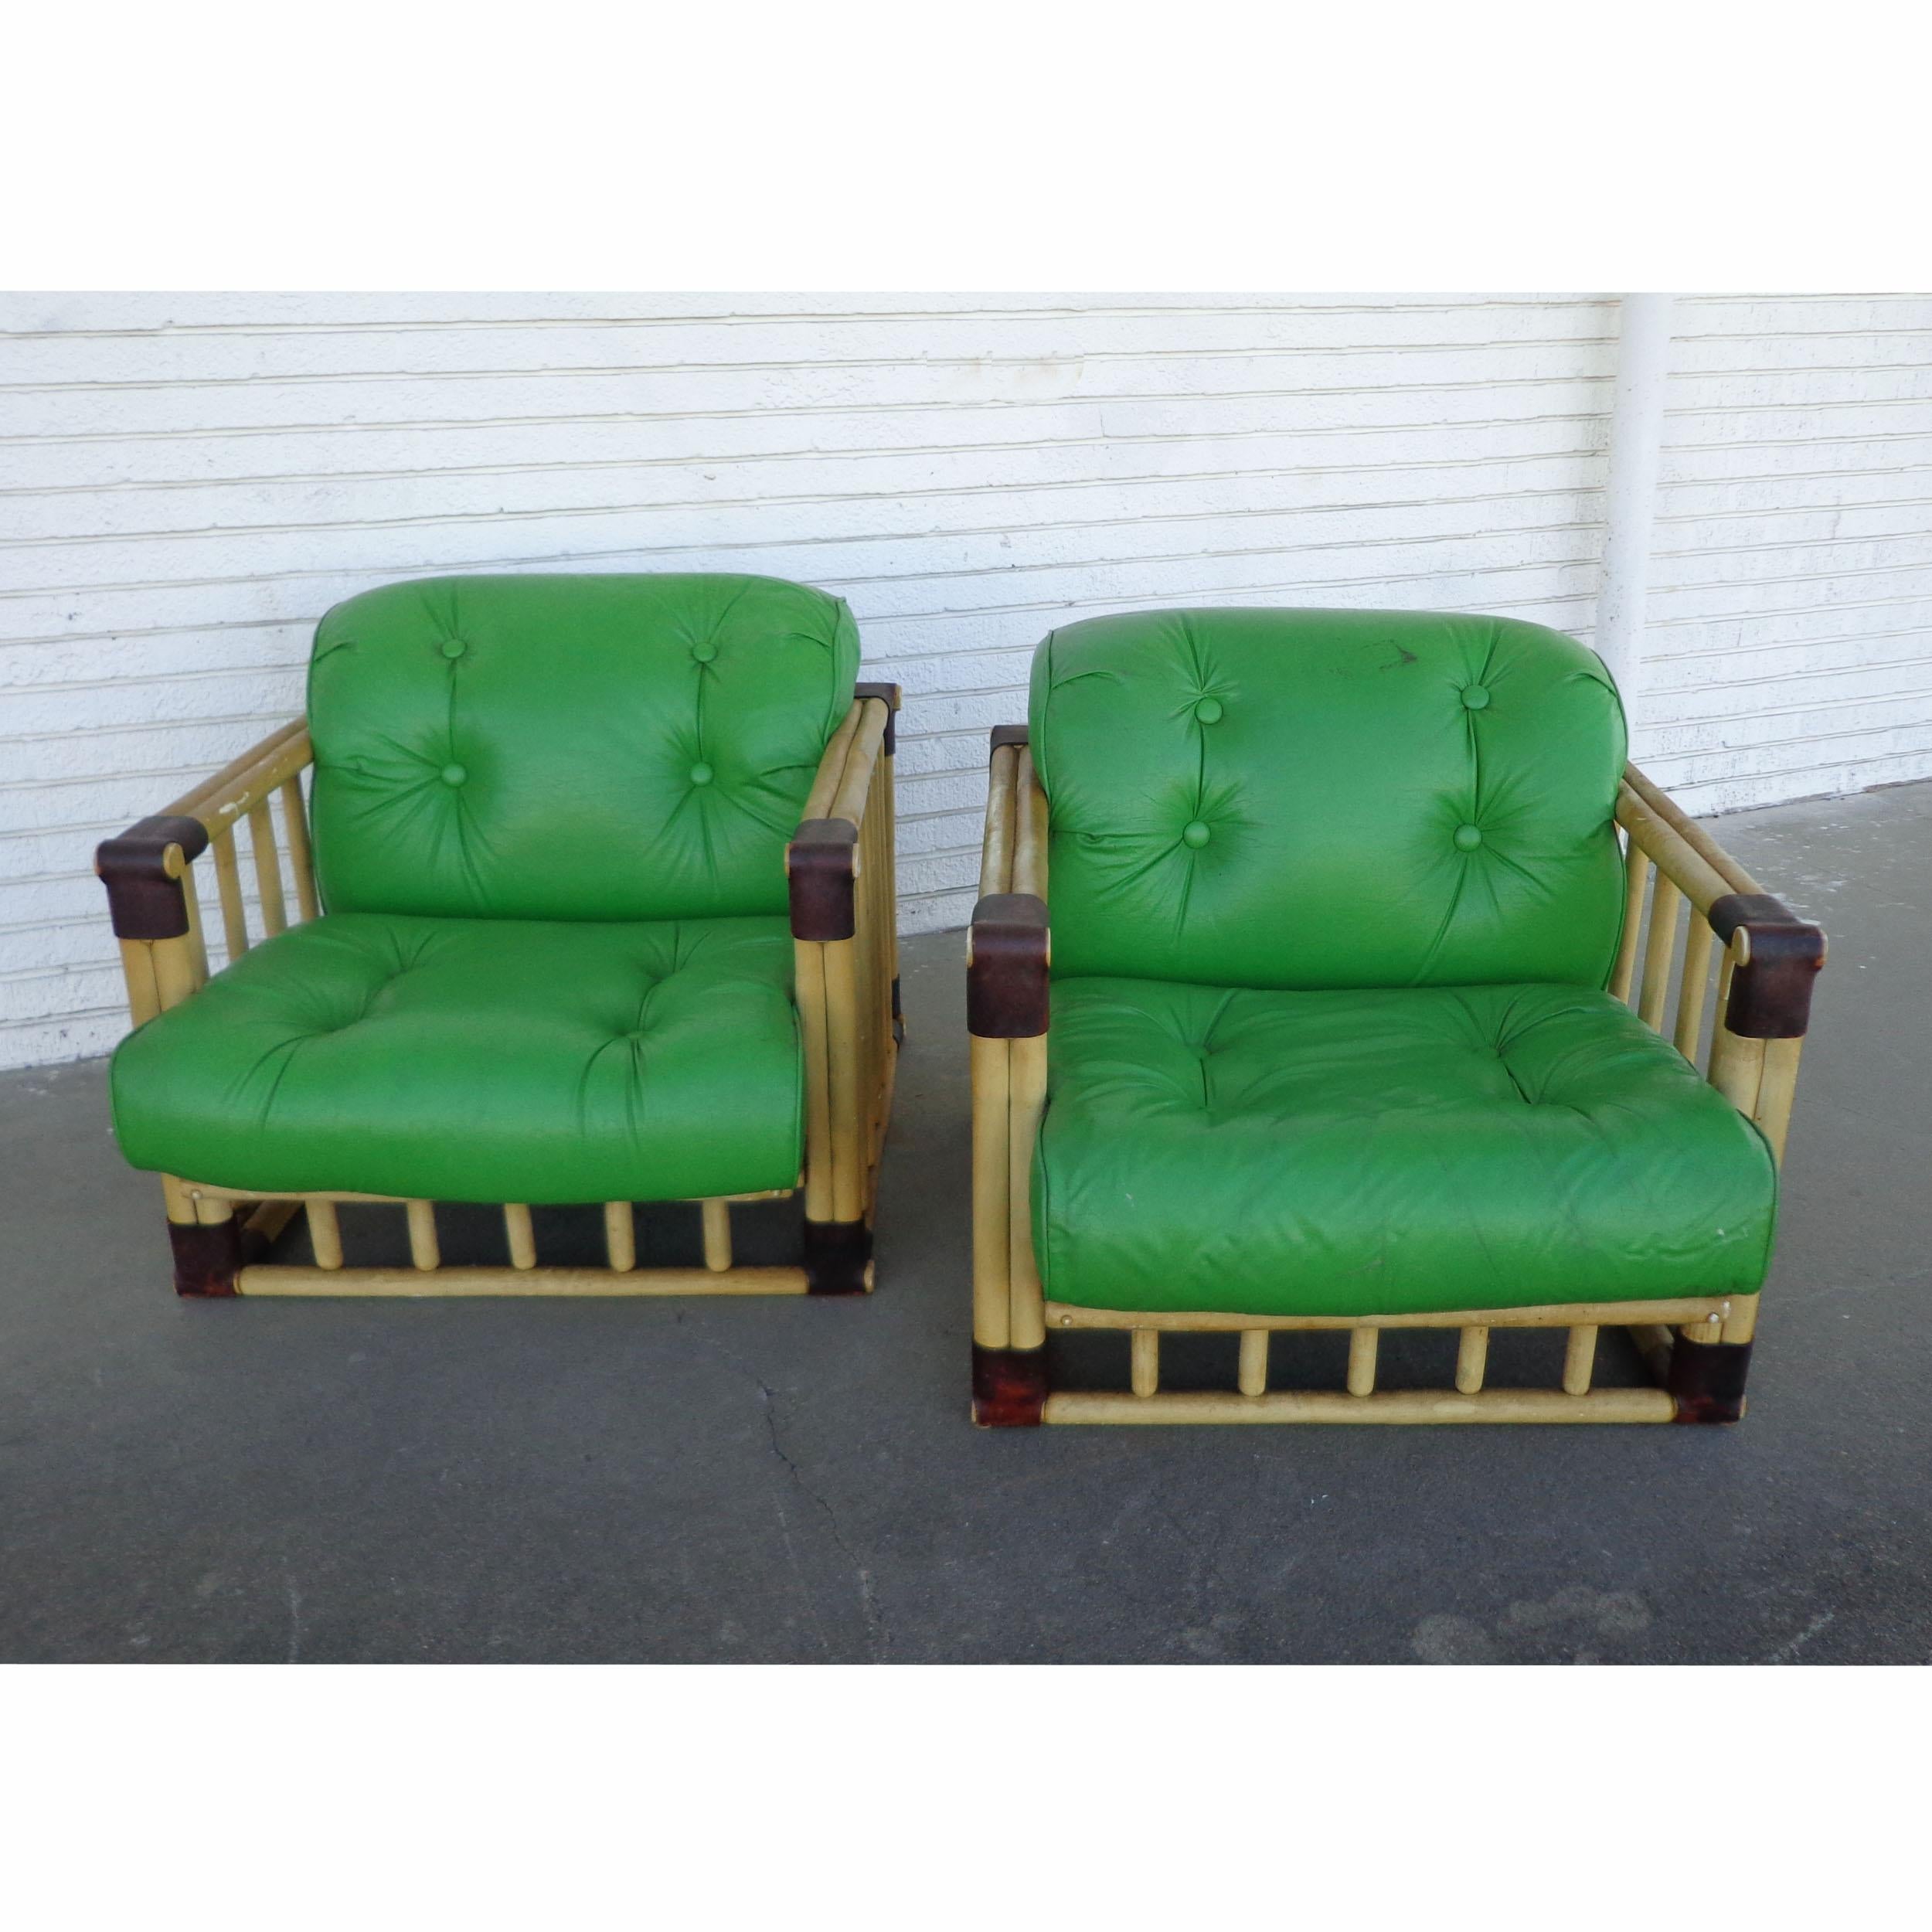 Pair of Original Bamboo Tufted Green Rattan Lounge Chairs by Ficks Reed, 1970's For Sale 2